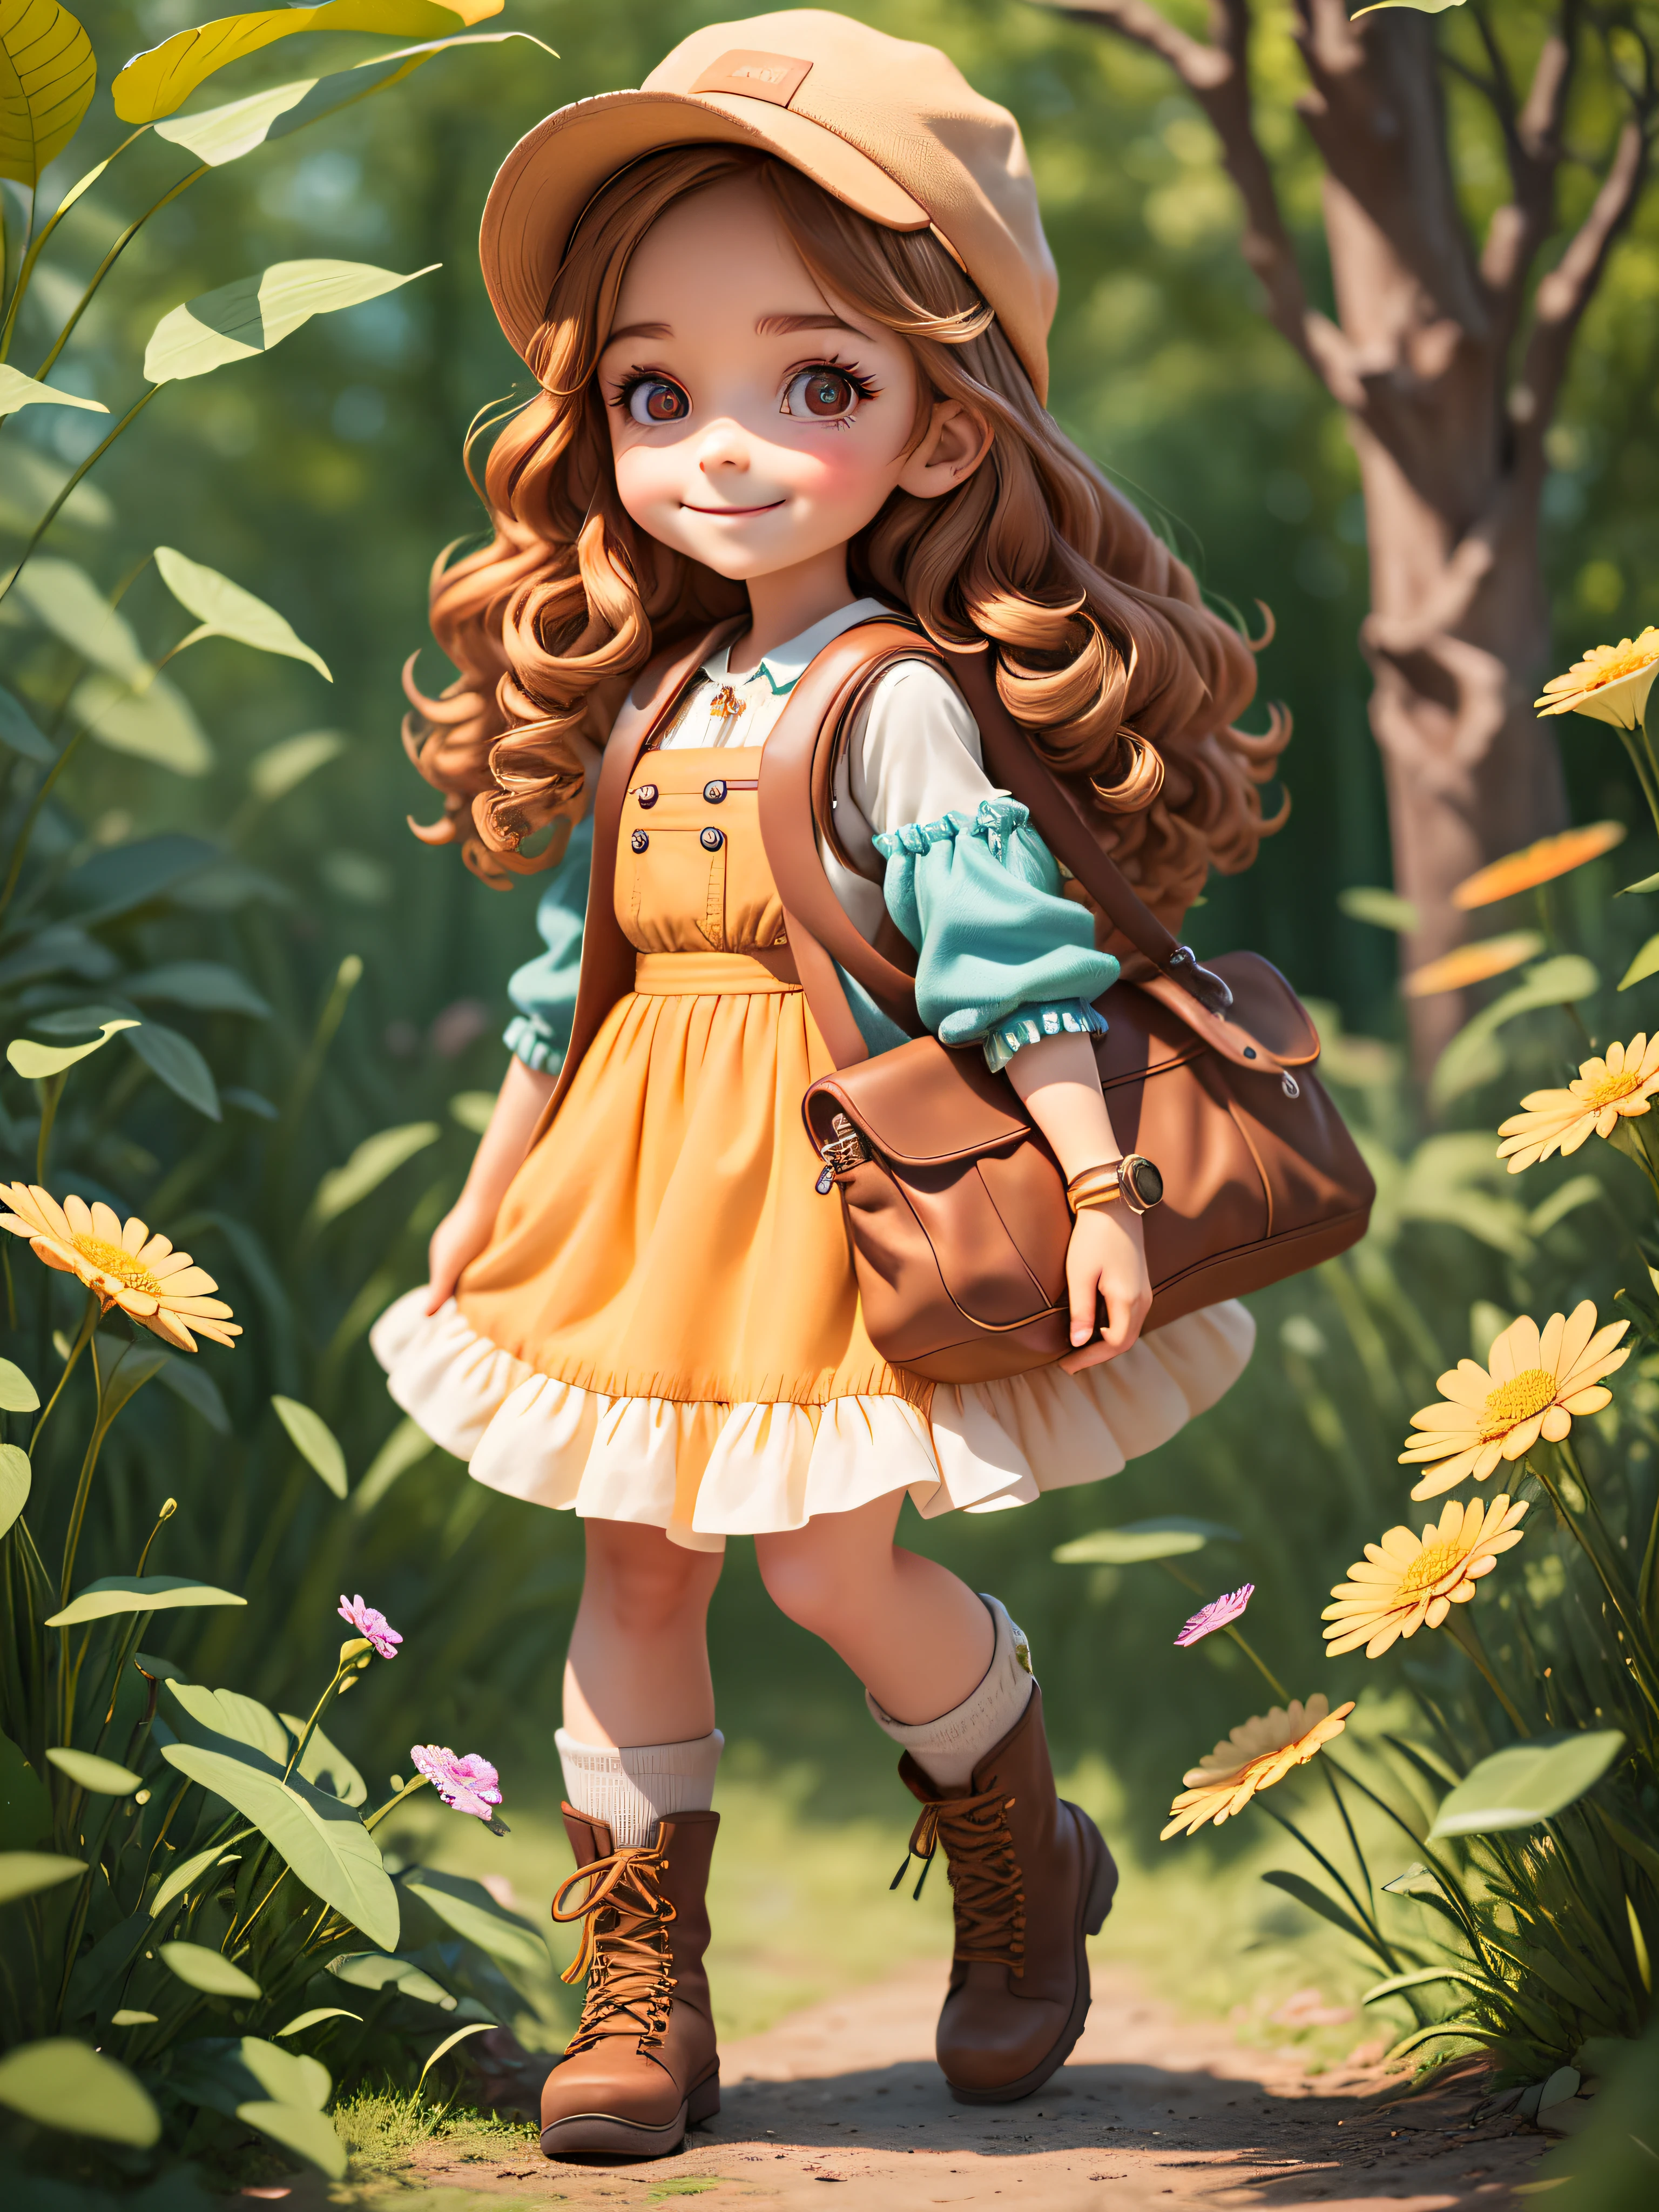 (masterpiece),(best quality),(ultra-detailed), (full body: 1.2), 1girl, Chibi, Cute, smile, shirt, Laura was a girl with light brown hair, which fell in soft curls over her shoulders. His eyes were large and bright, the color of honey, full of curiosity and courage. His smile was infectious, lighting up the environment around him. She had a small, snub nose, which complemented her delicate face. Laura was short and agile, always ready to explore new places and face challenges. She wore a comfortable, colorful outfit, with a brown leather vest, a floral blouse, and ripped jeans. On her feet, she wore sturdy hiking boots, perfect for her adventures in the woods. Laura had a special sparkle in her eyes that reflected her adventurous nature and her ability to find magic in every corner. (beautiful and detailed face), (beautiful detailed eyes),(masterpiece),(best quality),(ultra-detailed), (full body: 1.2), 1girl, Chibi, cute, smile, shirt, Laura was a 5-year-old girl, light brown hair, which fell in soft curls over her shoulders. His eyes were large and bright, the color of honey, full of curiosity and courage. His smile was infectious, lighting up the environment around him. She had a small, snub nose, which complemented her delicate face. Laura was short and agile, always ready to explore new places and face challenges. She wore a comfortable, colorful outfit, with a brown leather vest, a floral blouse, and ripped jeans. On her feet, she wore sturdy hiking boots, perfect for her adventures in the woods. Laura had a special sparkle in her eyes that reflected her adventurous nature and her ability to find magic in every corner. (beautiful and detailed face), (beautiful detailed eyes).